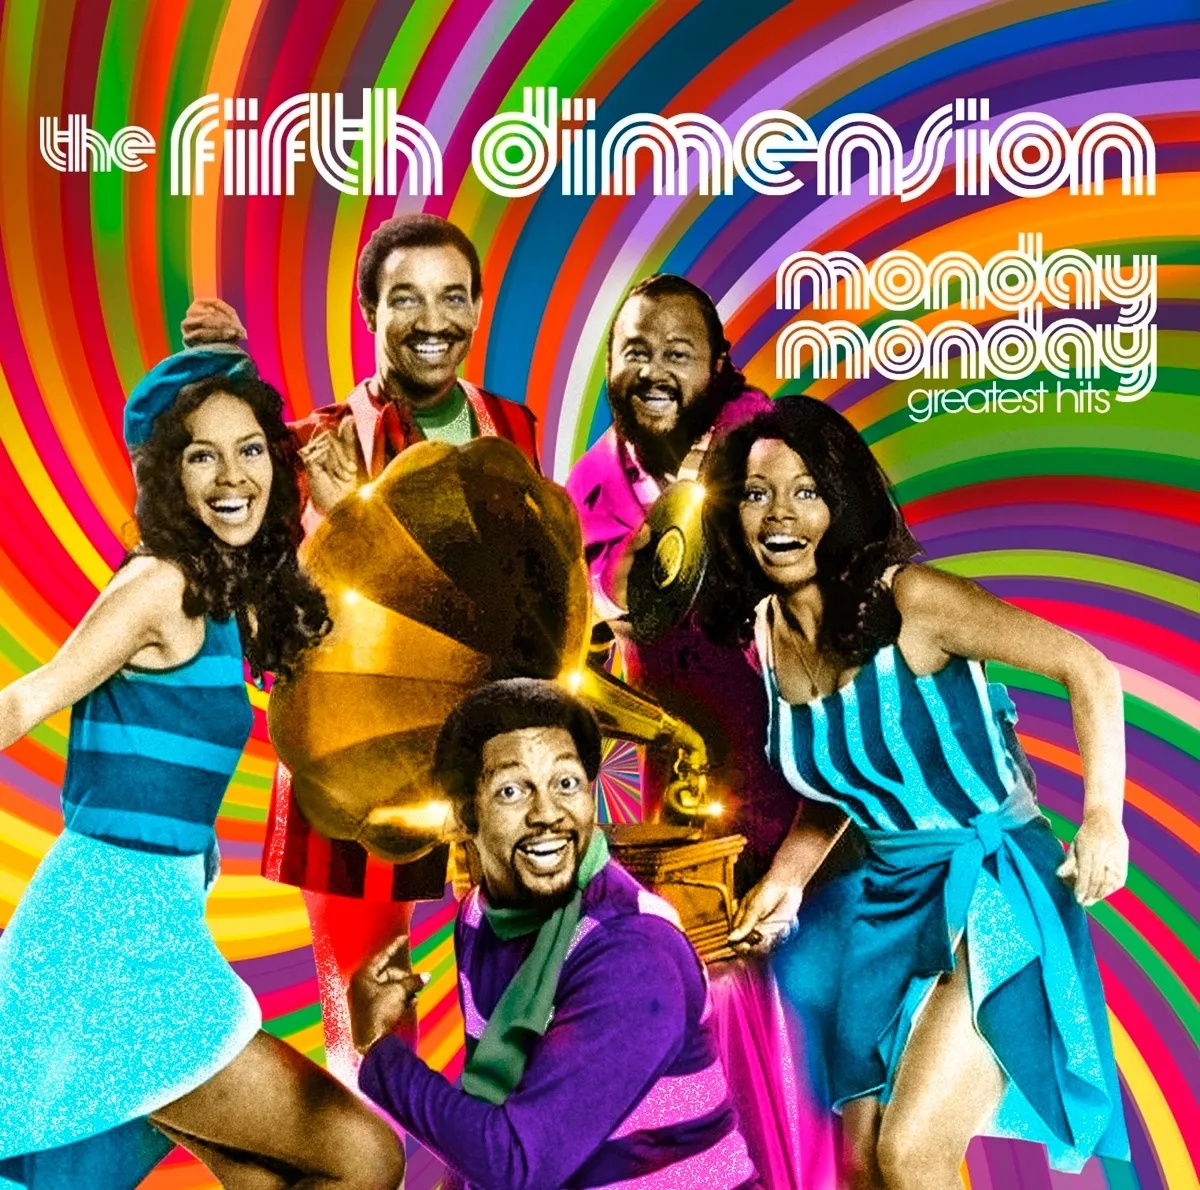 Monday Monday-Greatest Hits - Fifth Dimension. (CD)